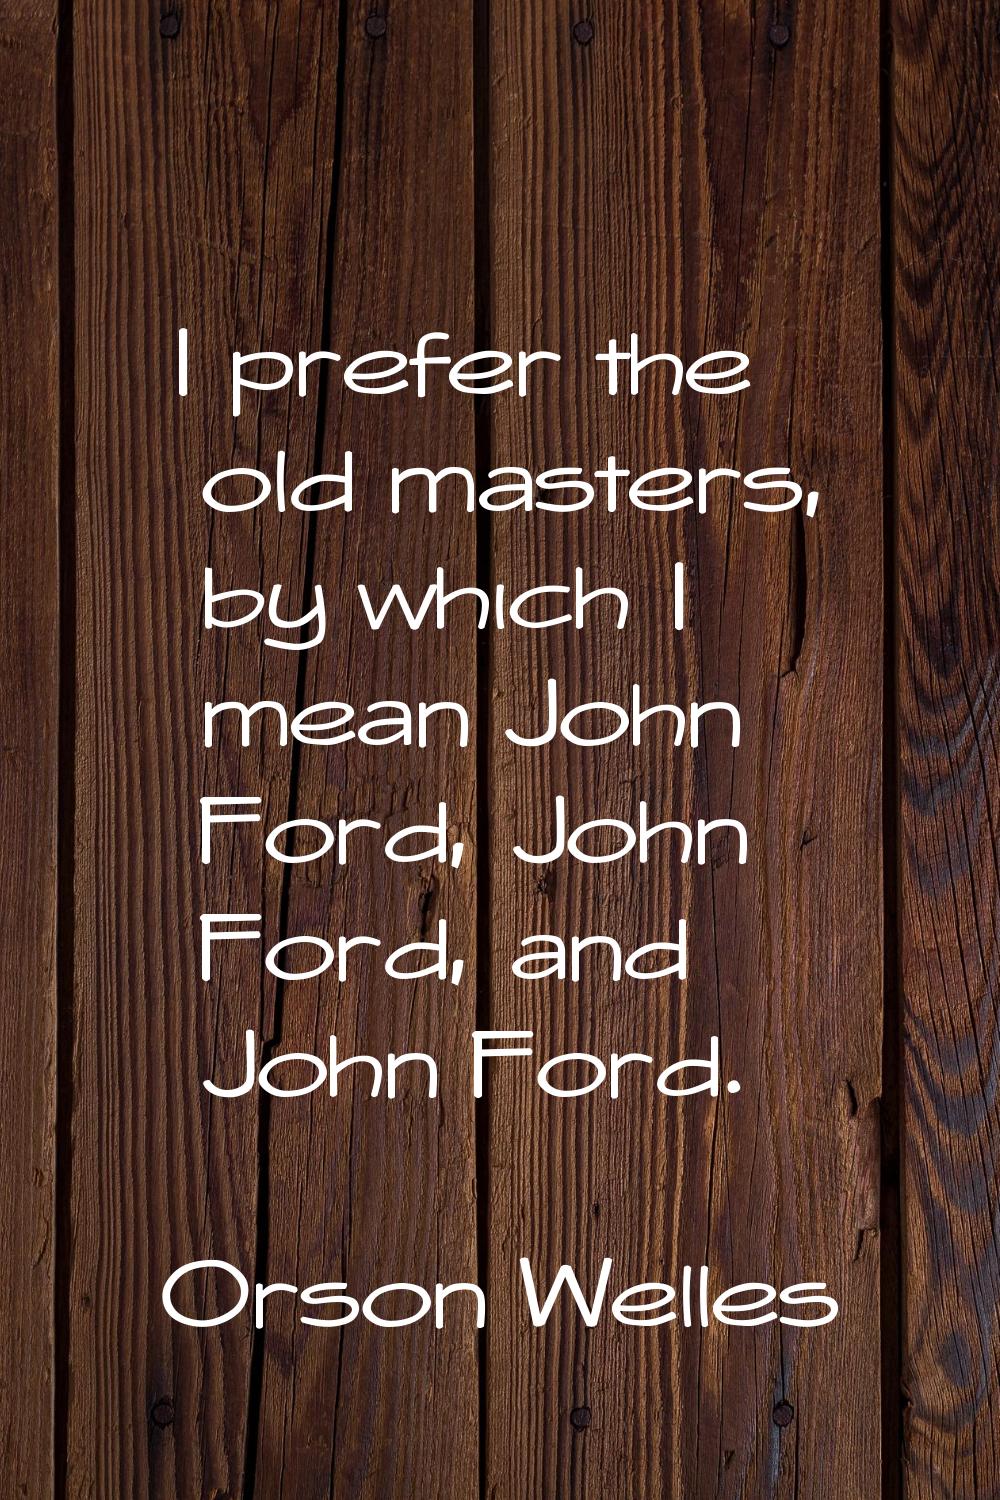 I prefer the old masters, by which I mean John Ford, John Ford, and John Ford.